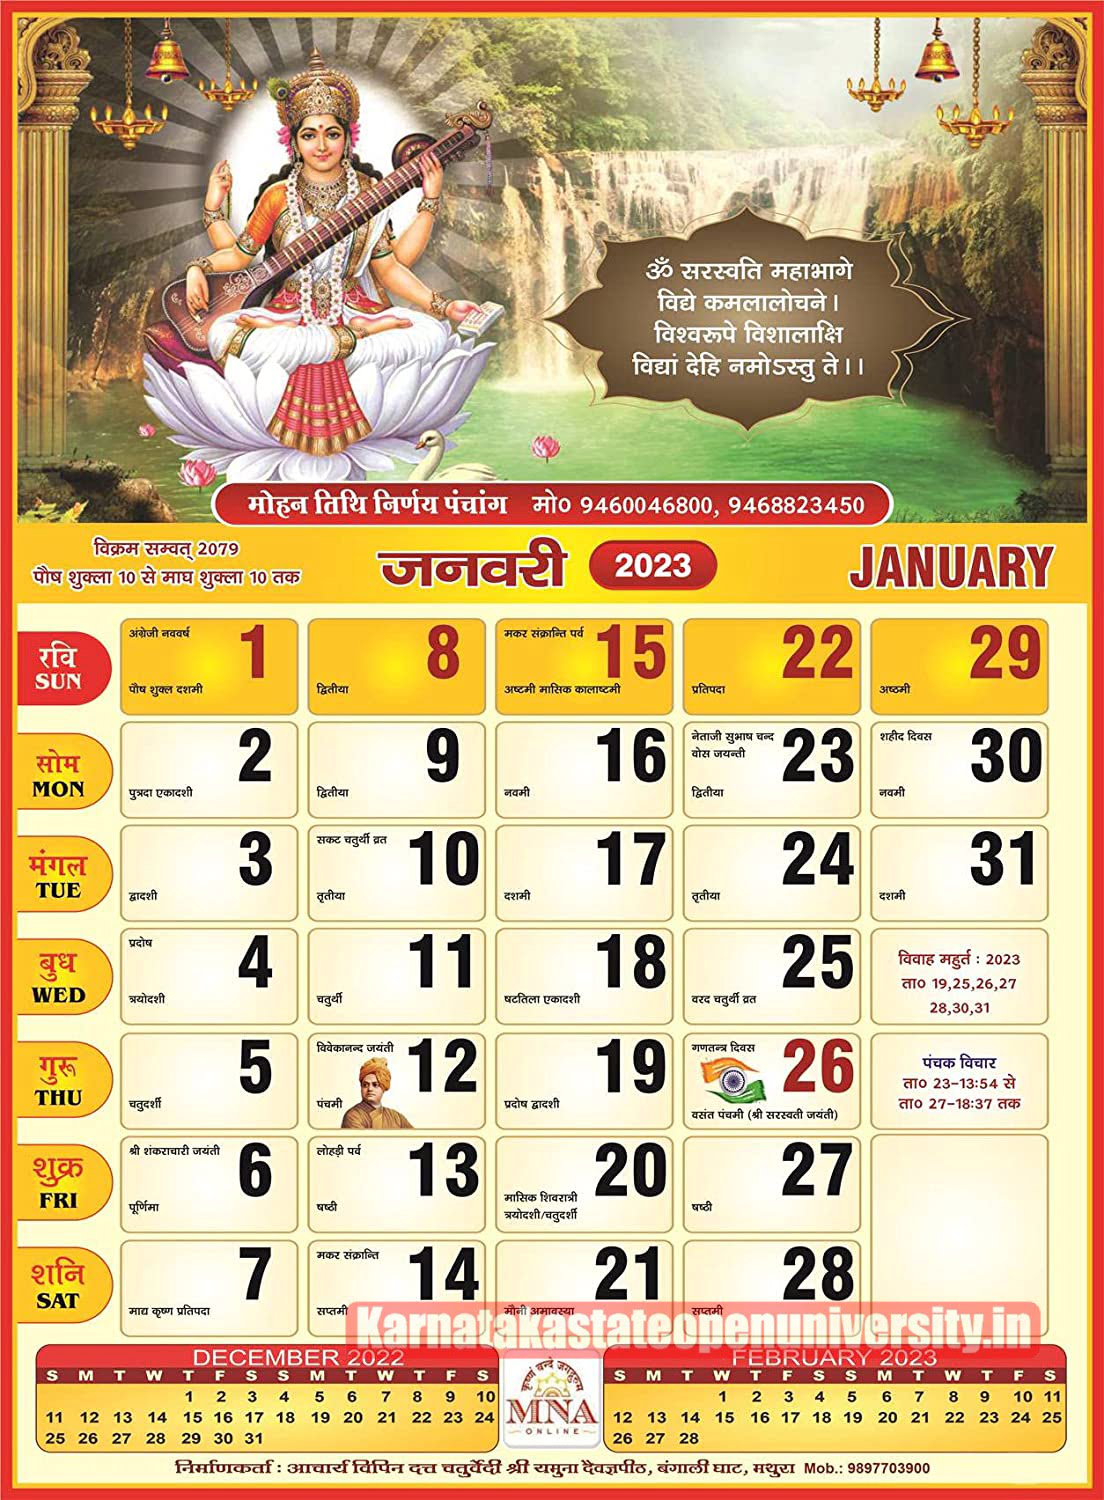 calendar-2023-india-with-holidays-and-festivals